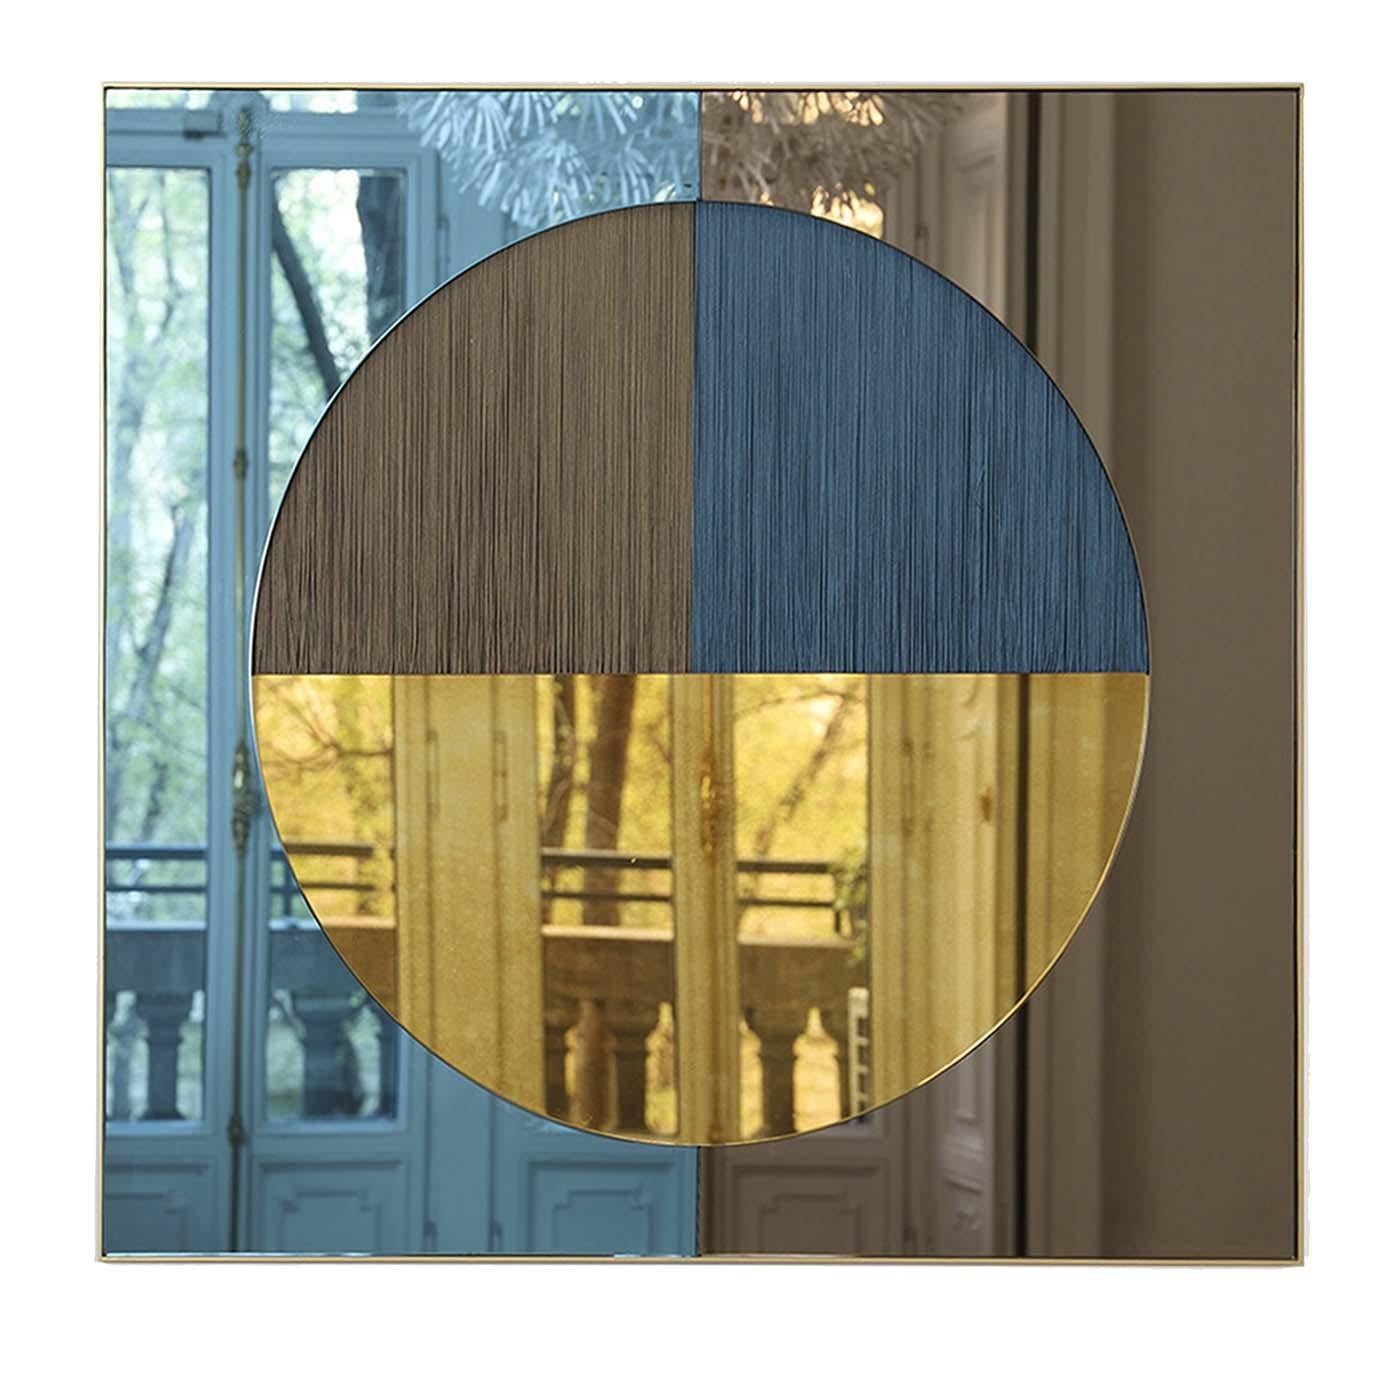 Part of the Couture collection, made up of striking and eclectic pieces for the modern home, this mirror will be an eye-catching addition to an entryway, living room, or bedroom. Its round Silhouette is supported by a metal frame with a brass